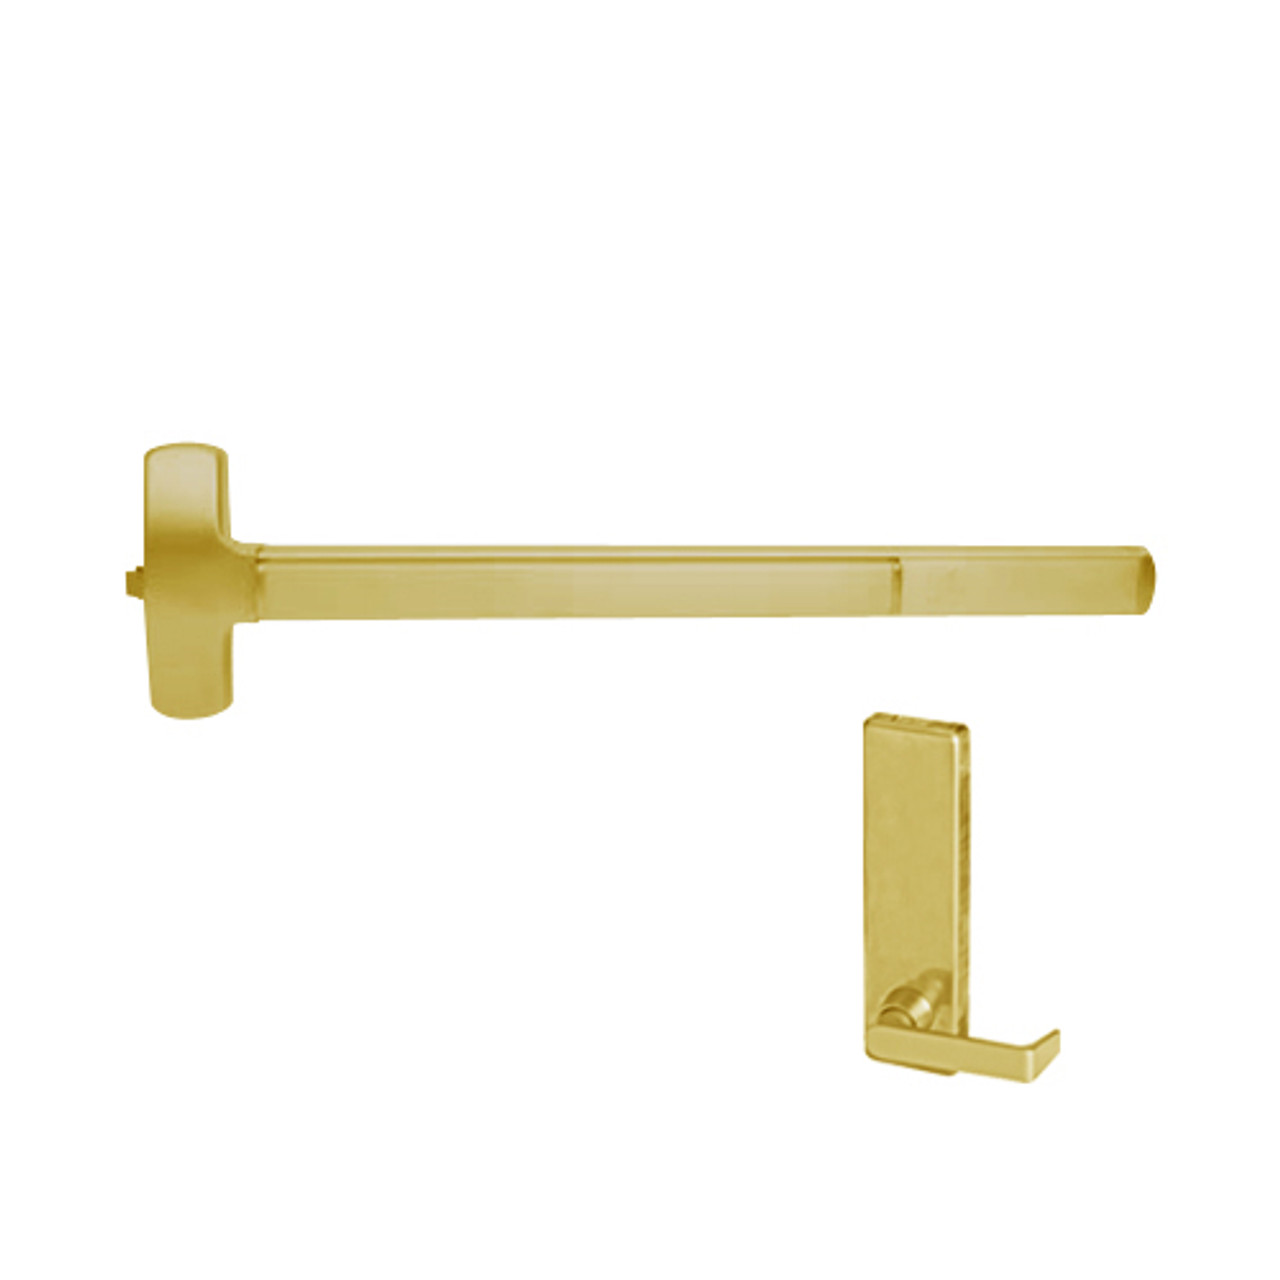 F-25-R-L-DT-DANE-US3-4-LHR Falcon Exit Device in Polished Brass